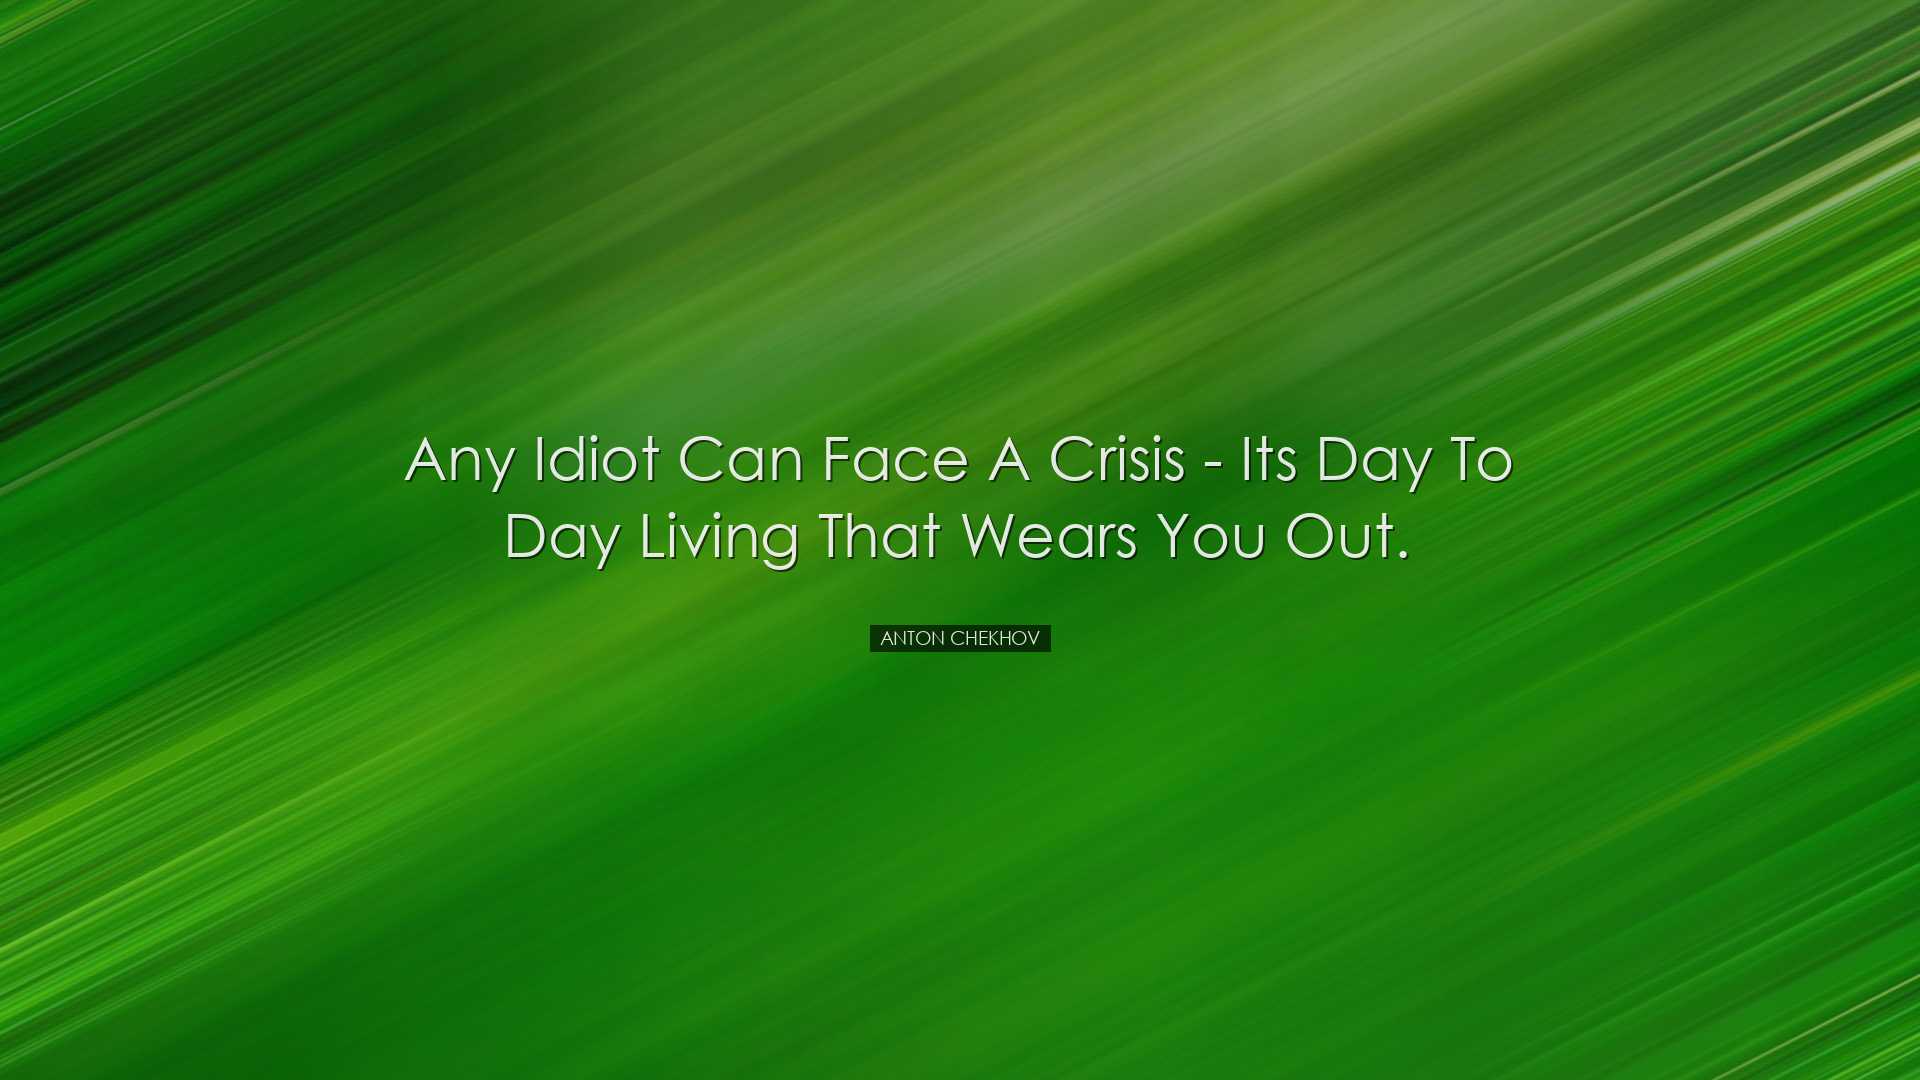 Any idiot can face a crisis - its day to day living that wears you